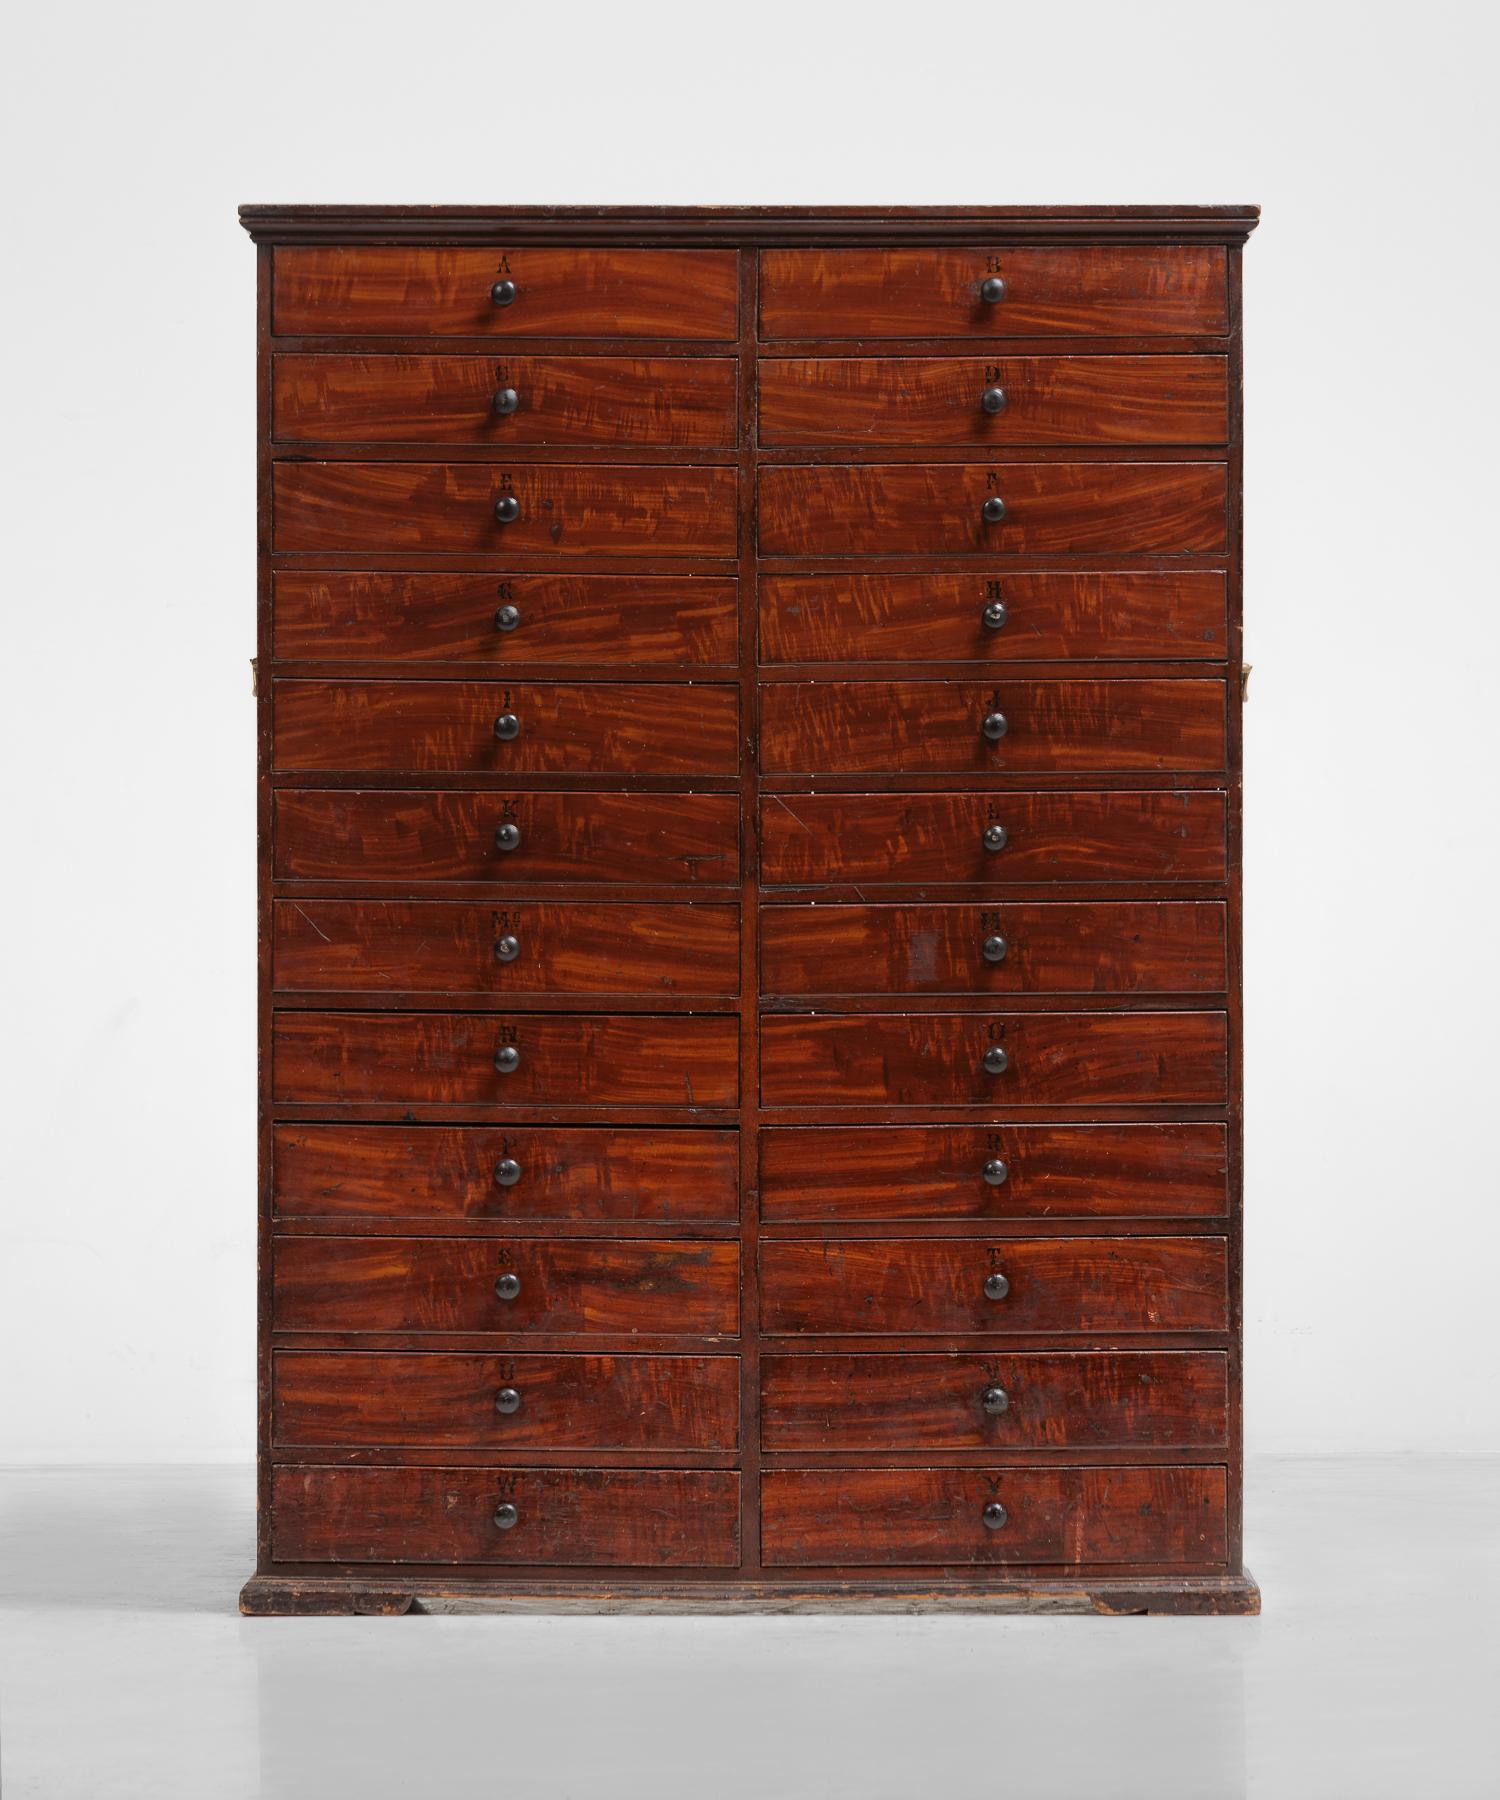 Mahogany estate chest of drawers, England, circa 1840.

Stained mahogany with wooden pulls and unique hand-painted lettering categorization system.

Measures: 49.5